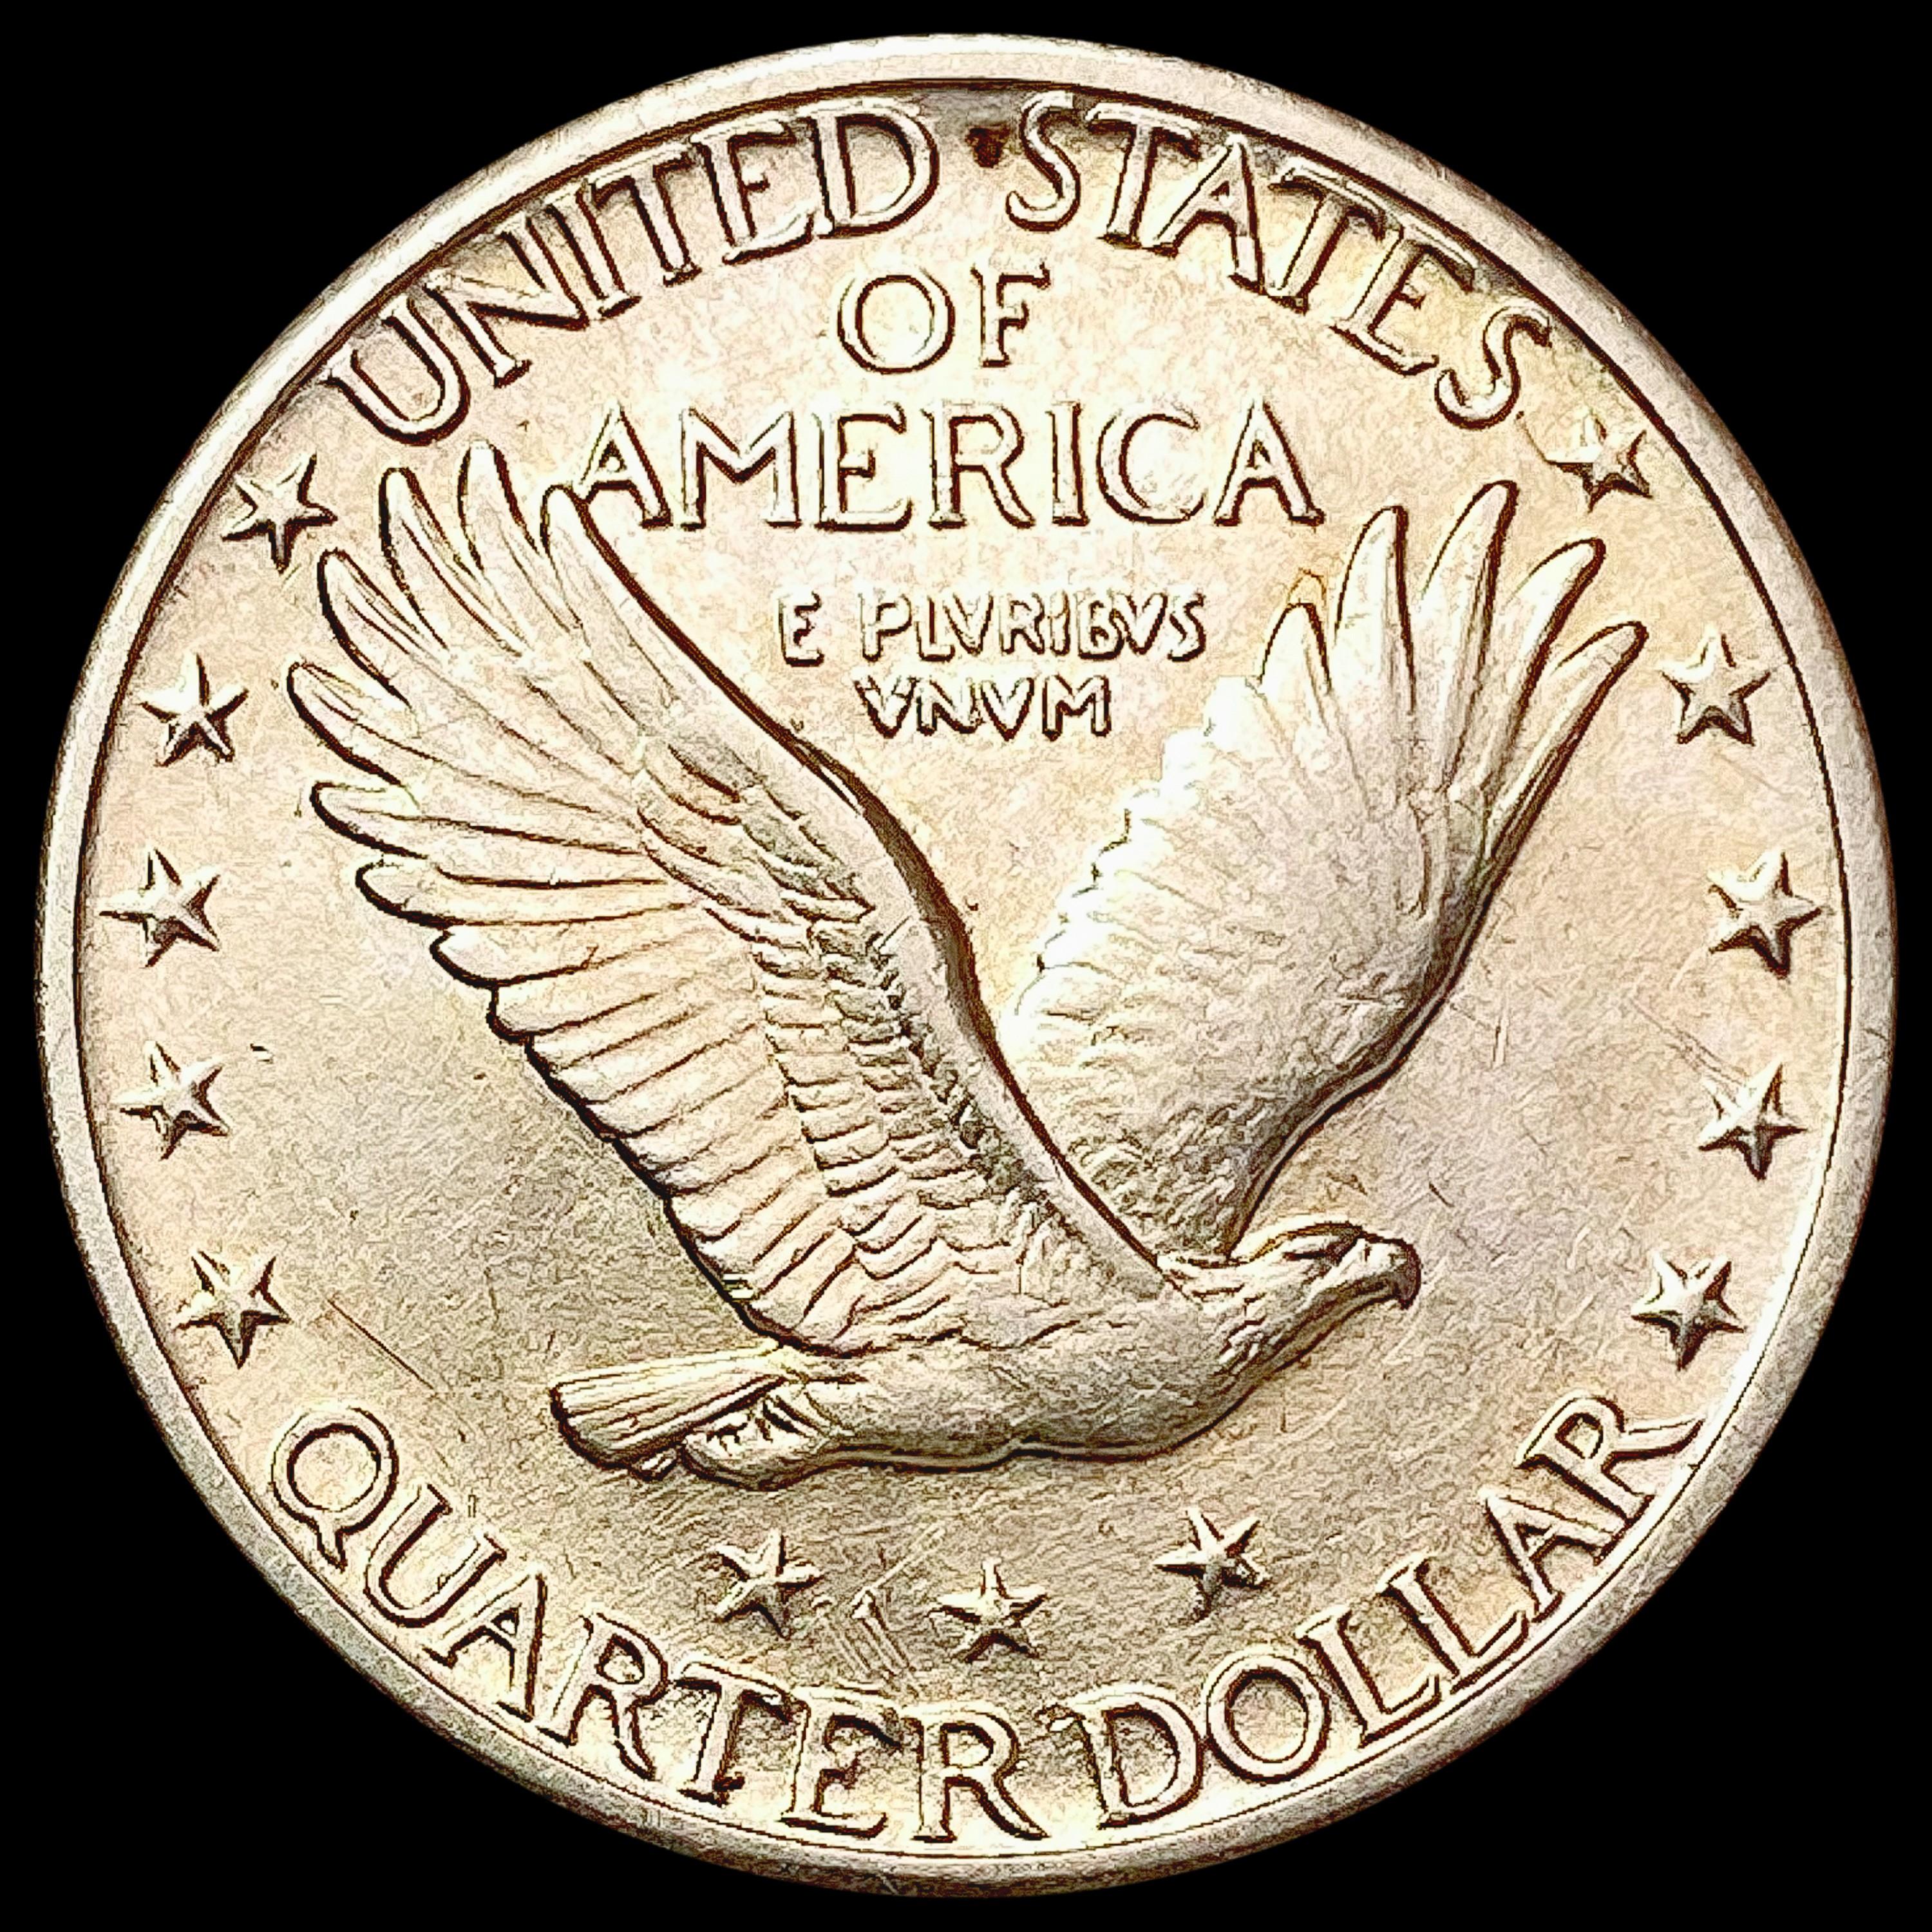 1926 Standing Liberty Quarter CLOSELY UNCIRCULATED